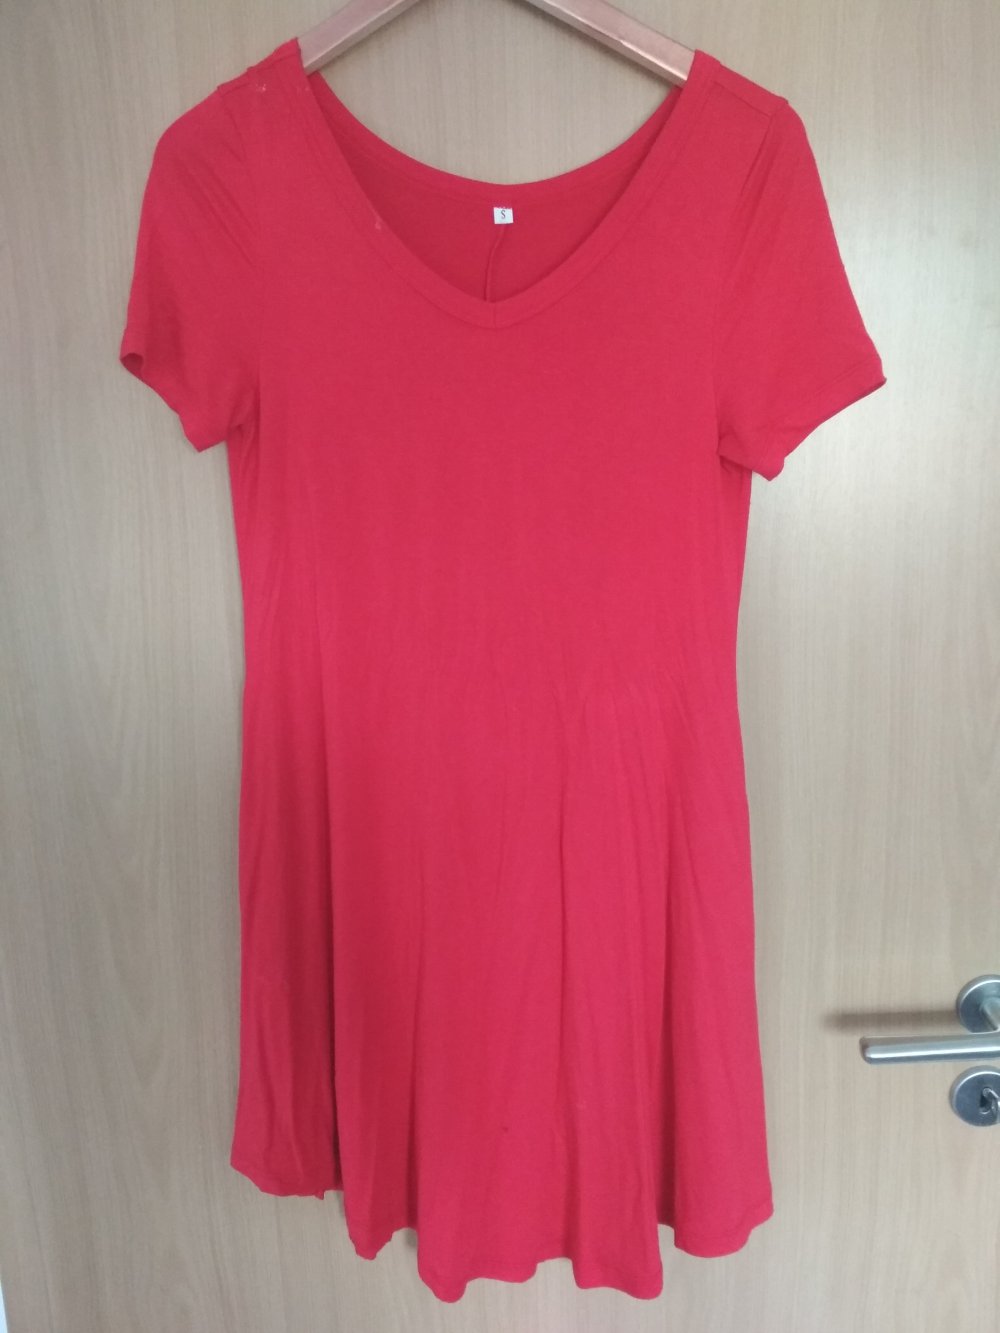 Rotes T-shirt Kleid